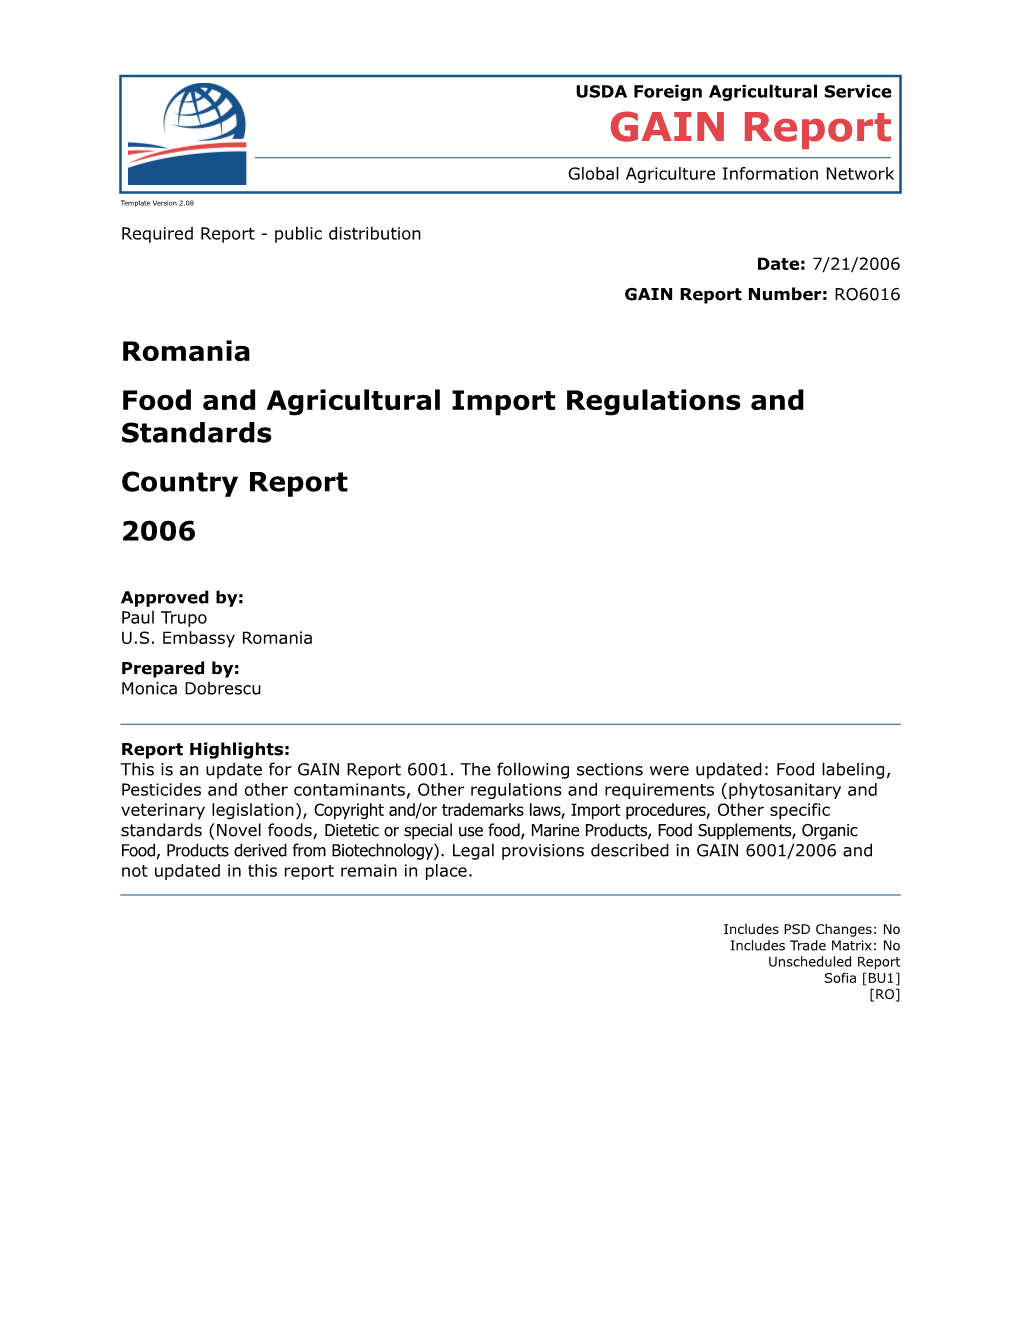 Food and Agricultural Import Regulations and Standards s5